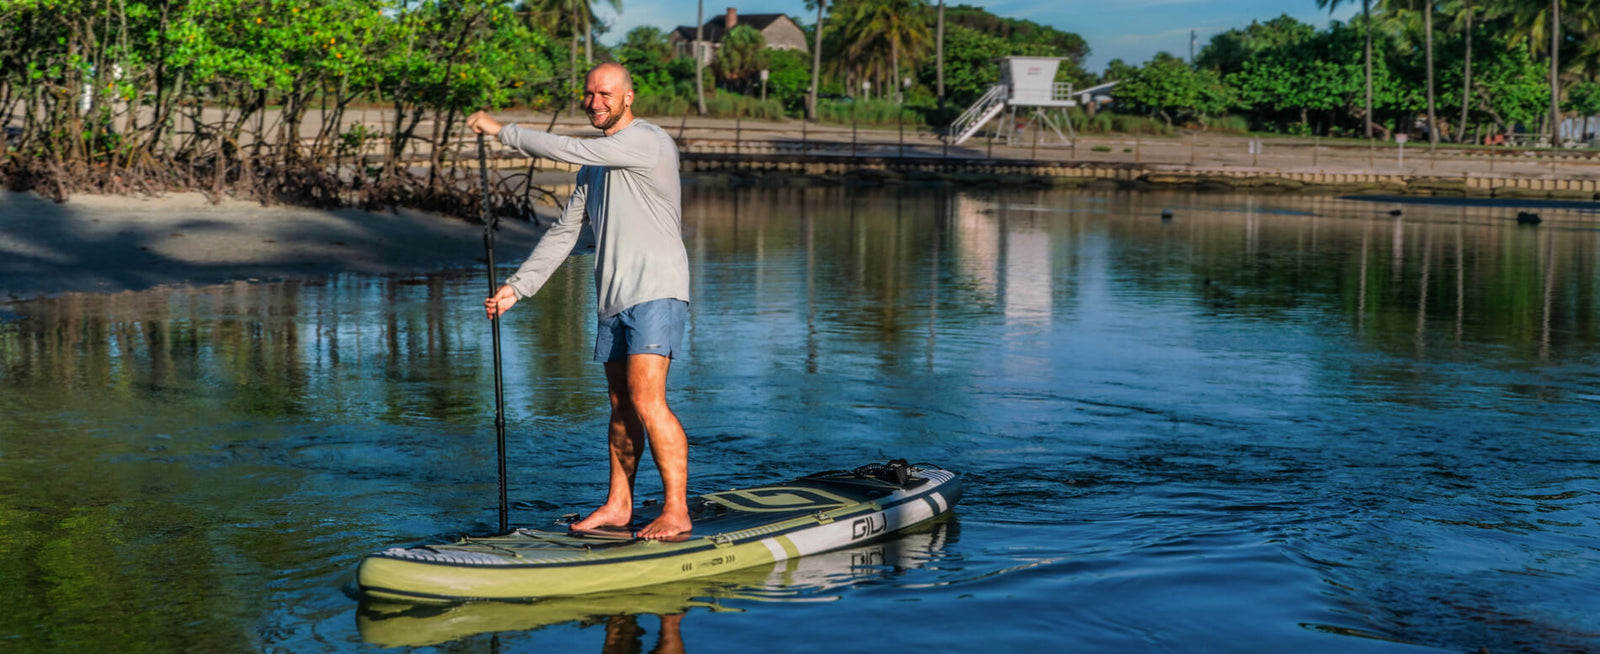 How to Paddle Board, Beginner's Guide to SUP